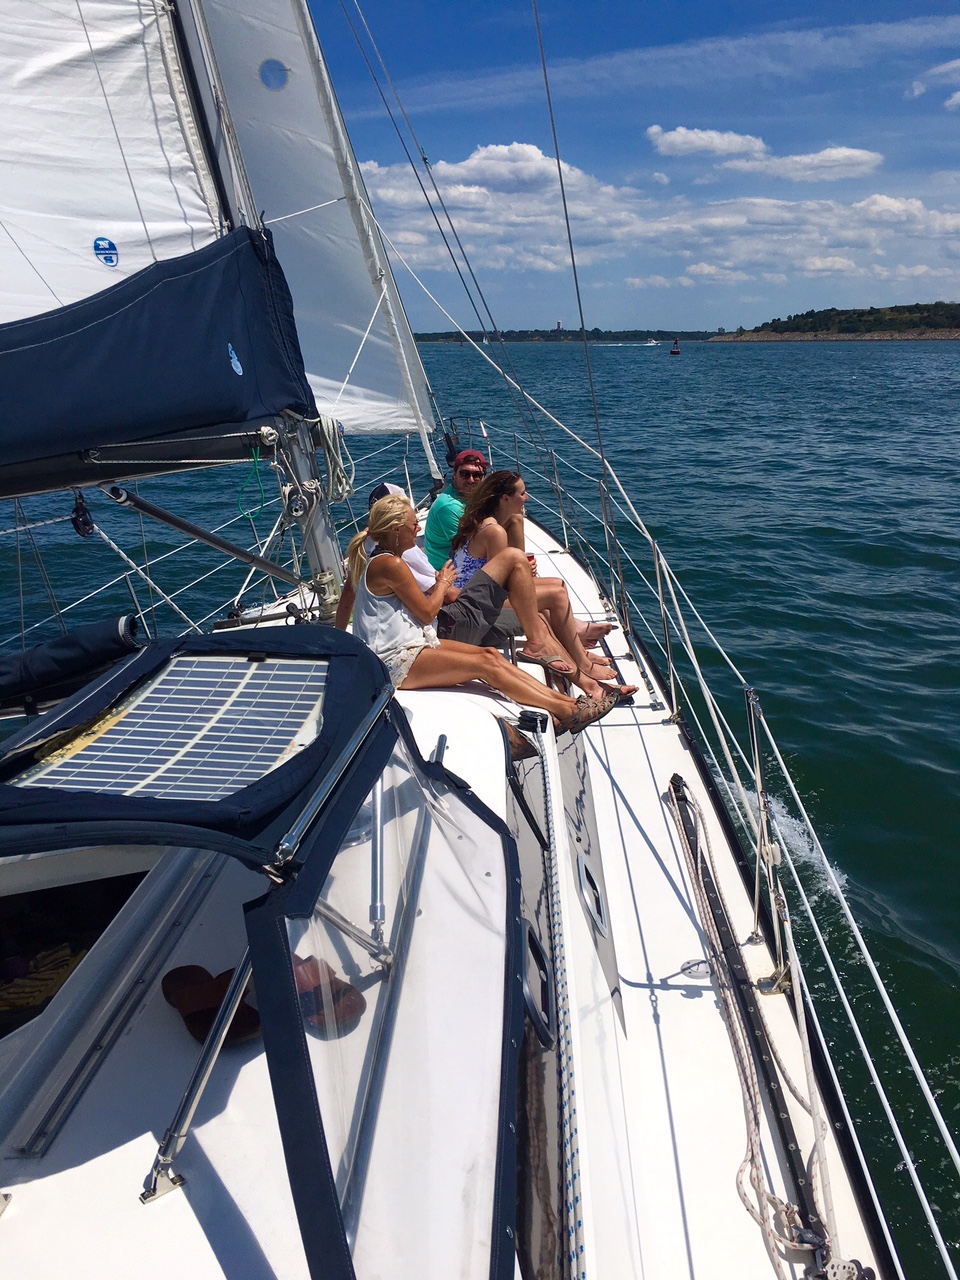 65ft sailing yacht INDEPENDENCE on route between Boston and Marblehead, MA